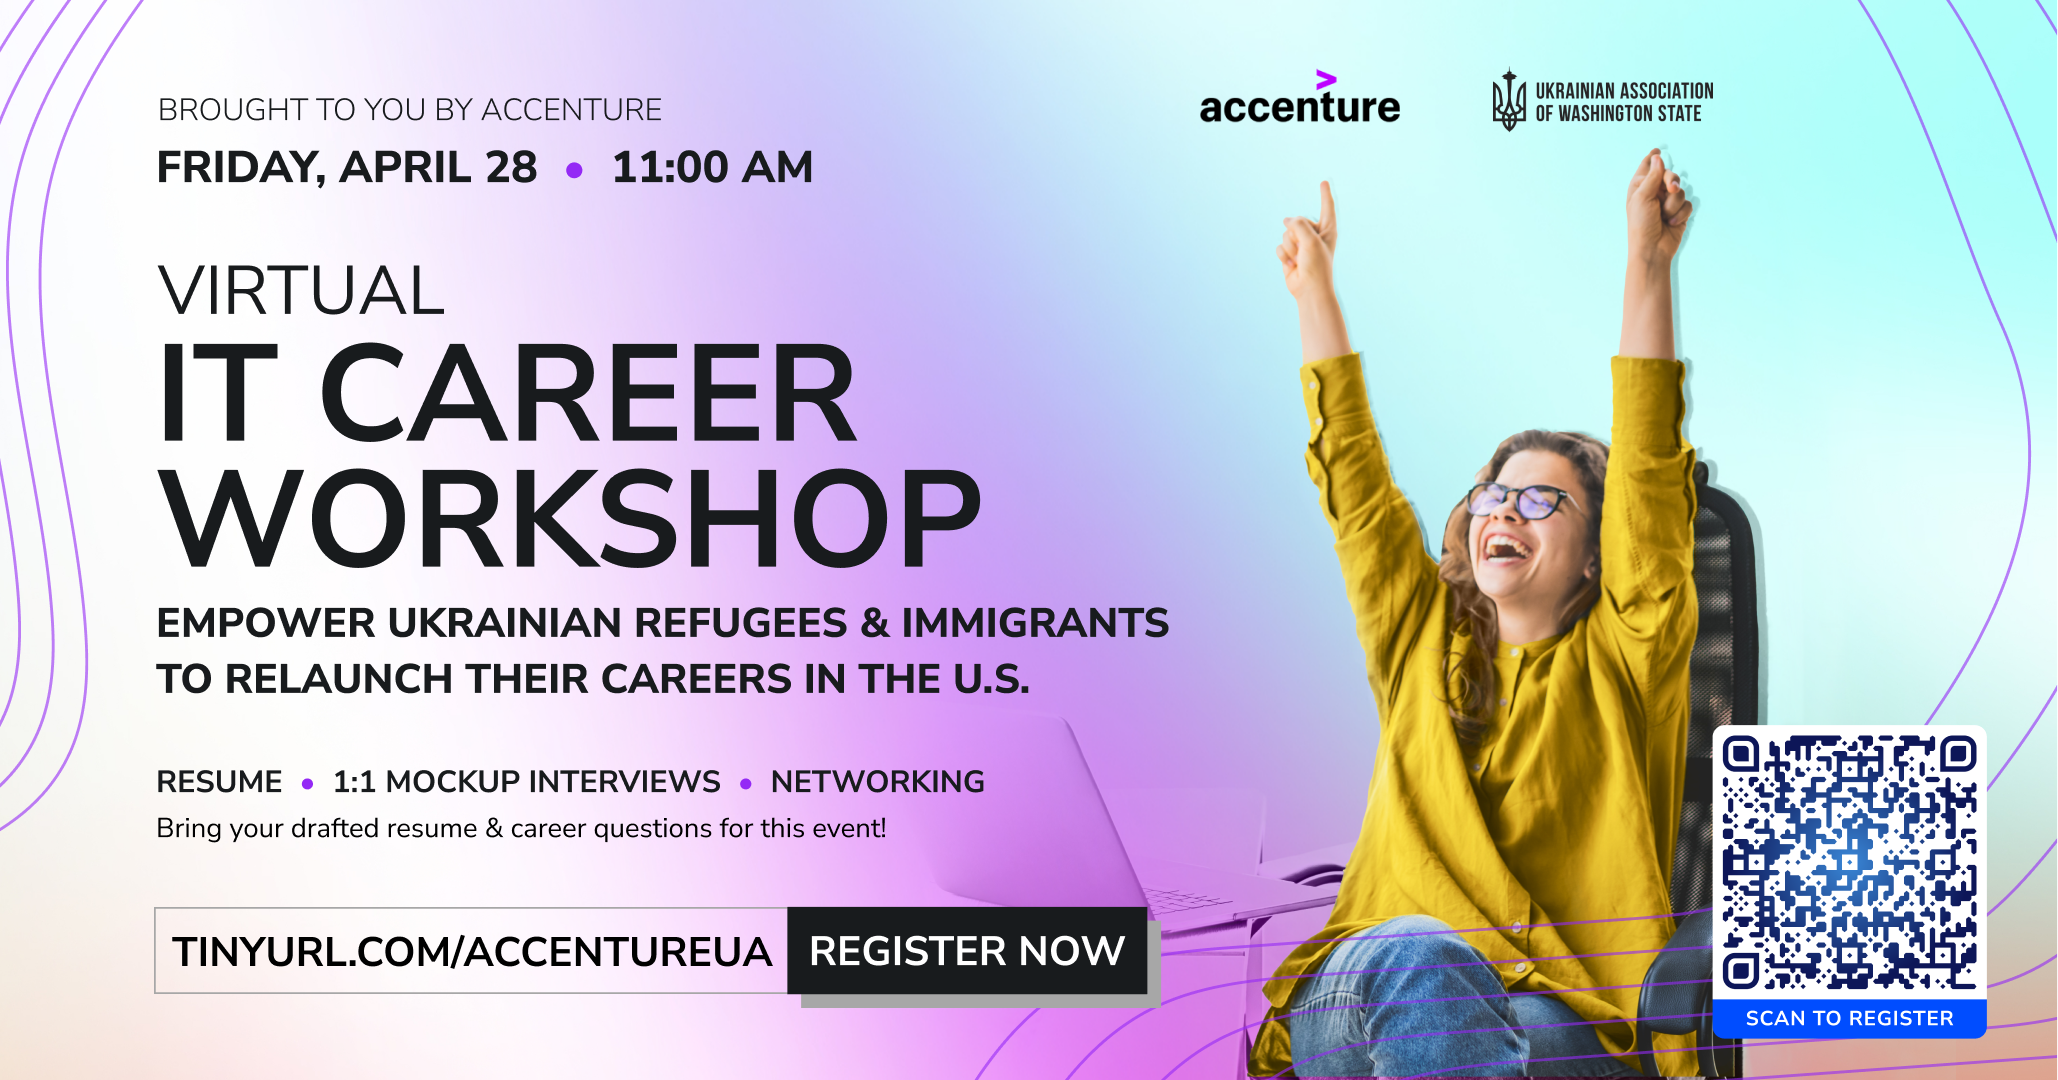 IT Career Workshop for Ukrainian Refugees & Immigrants hosted by Accenture